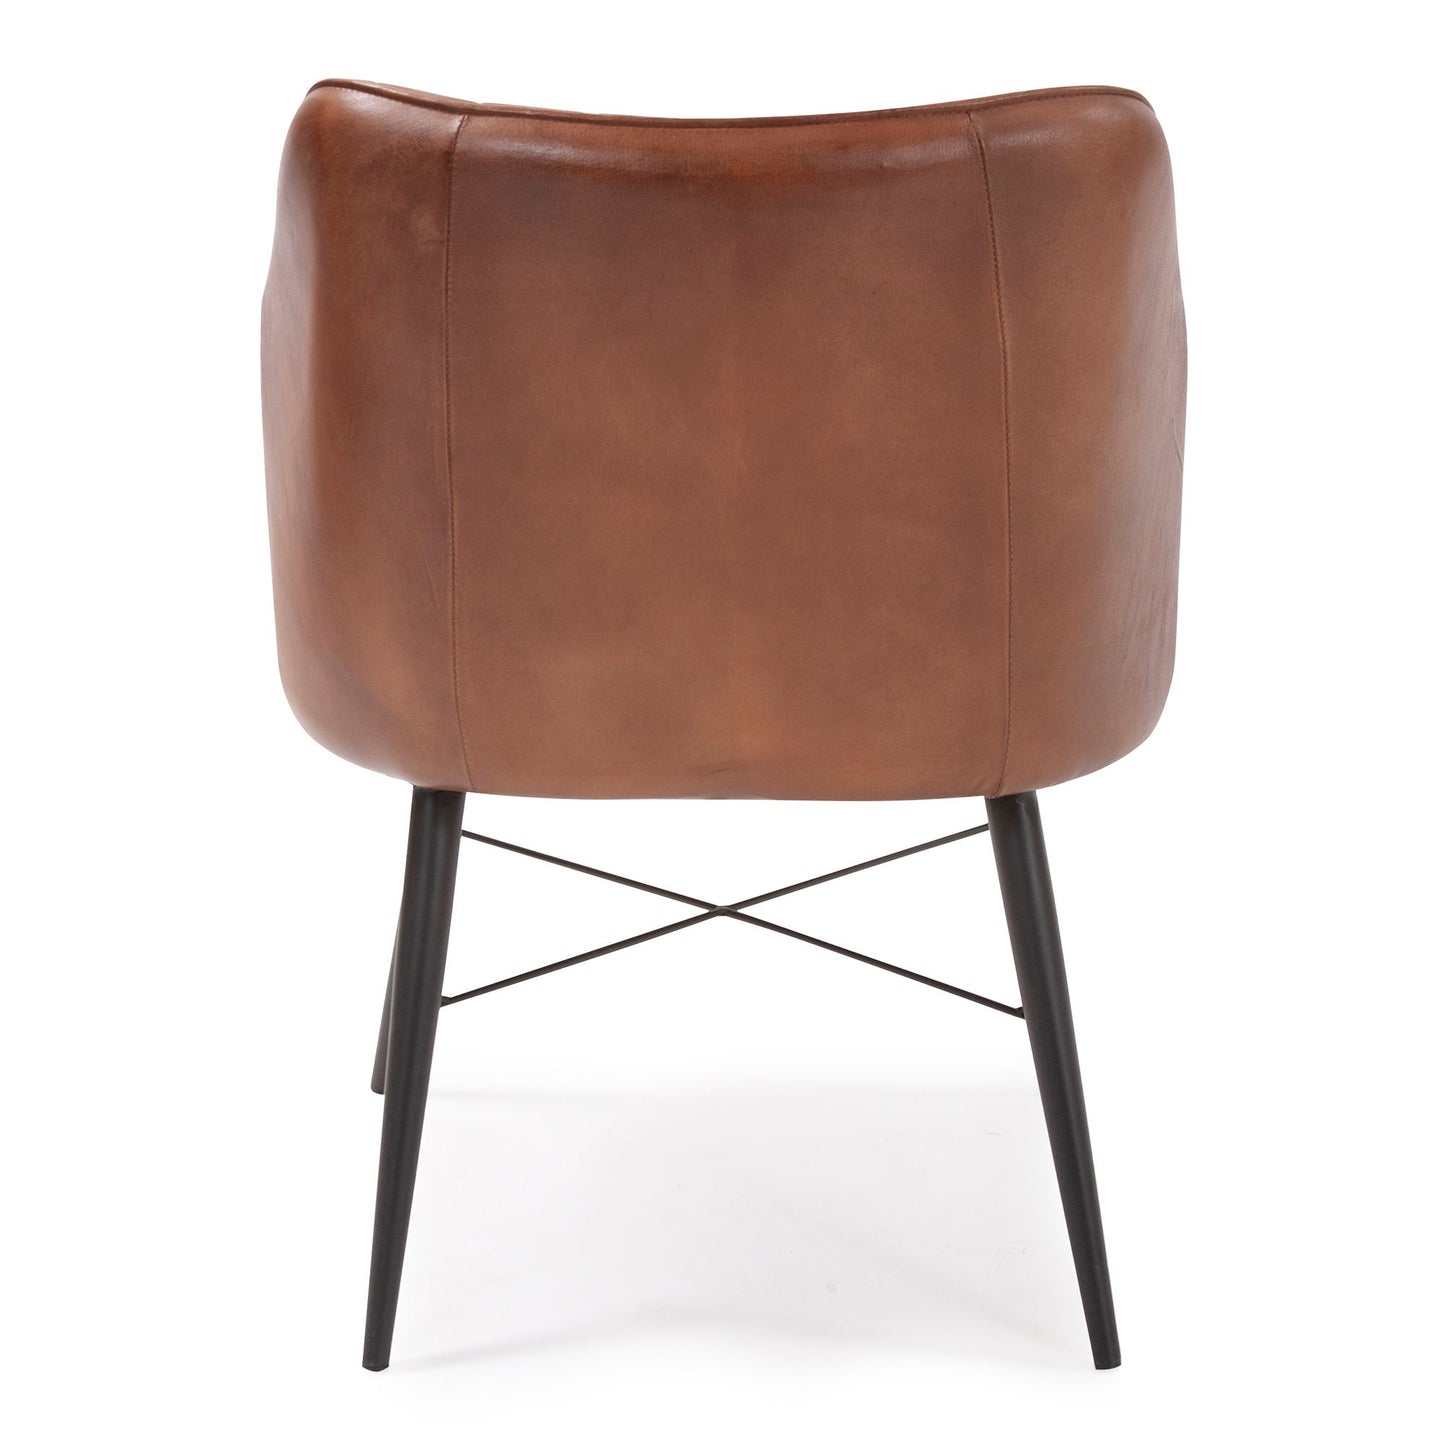 Bruno Brown Channeled Leather Chair